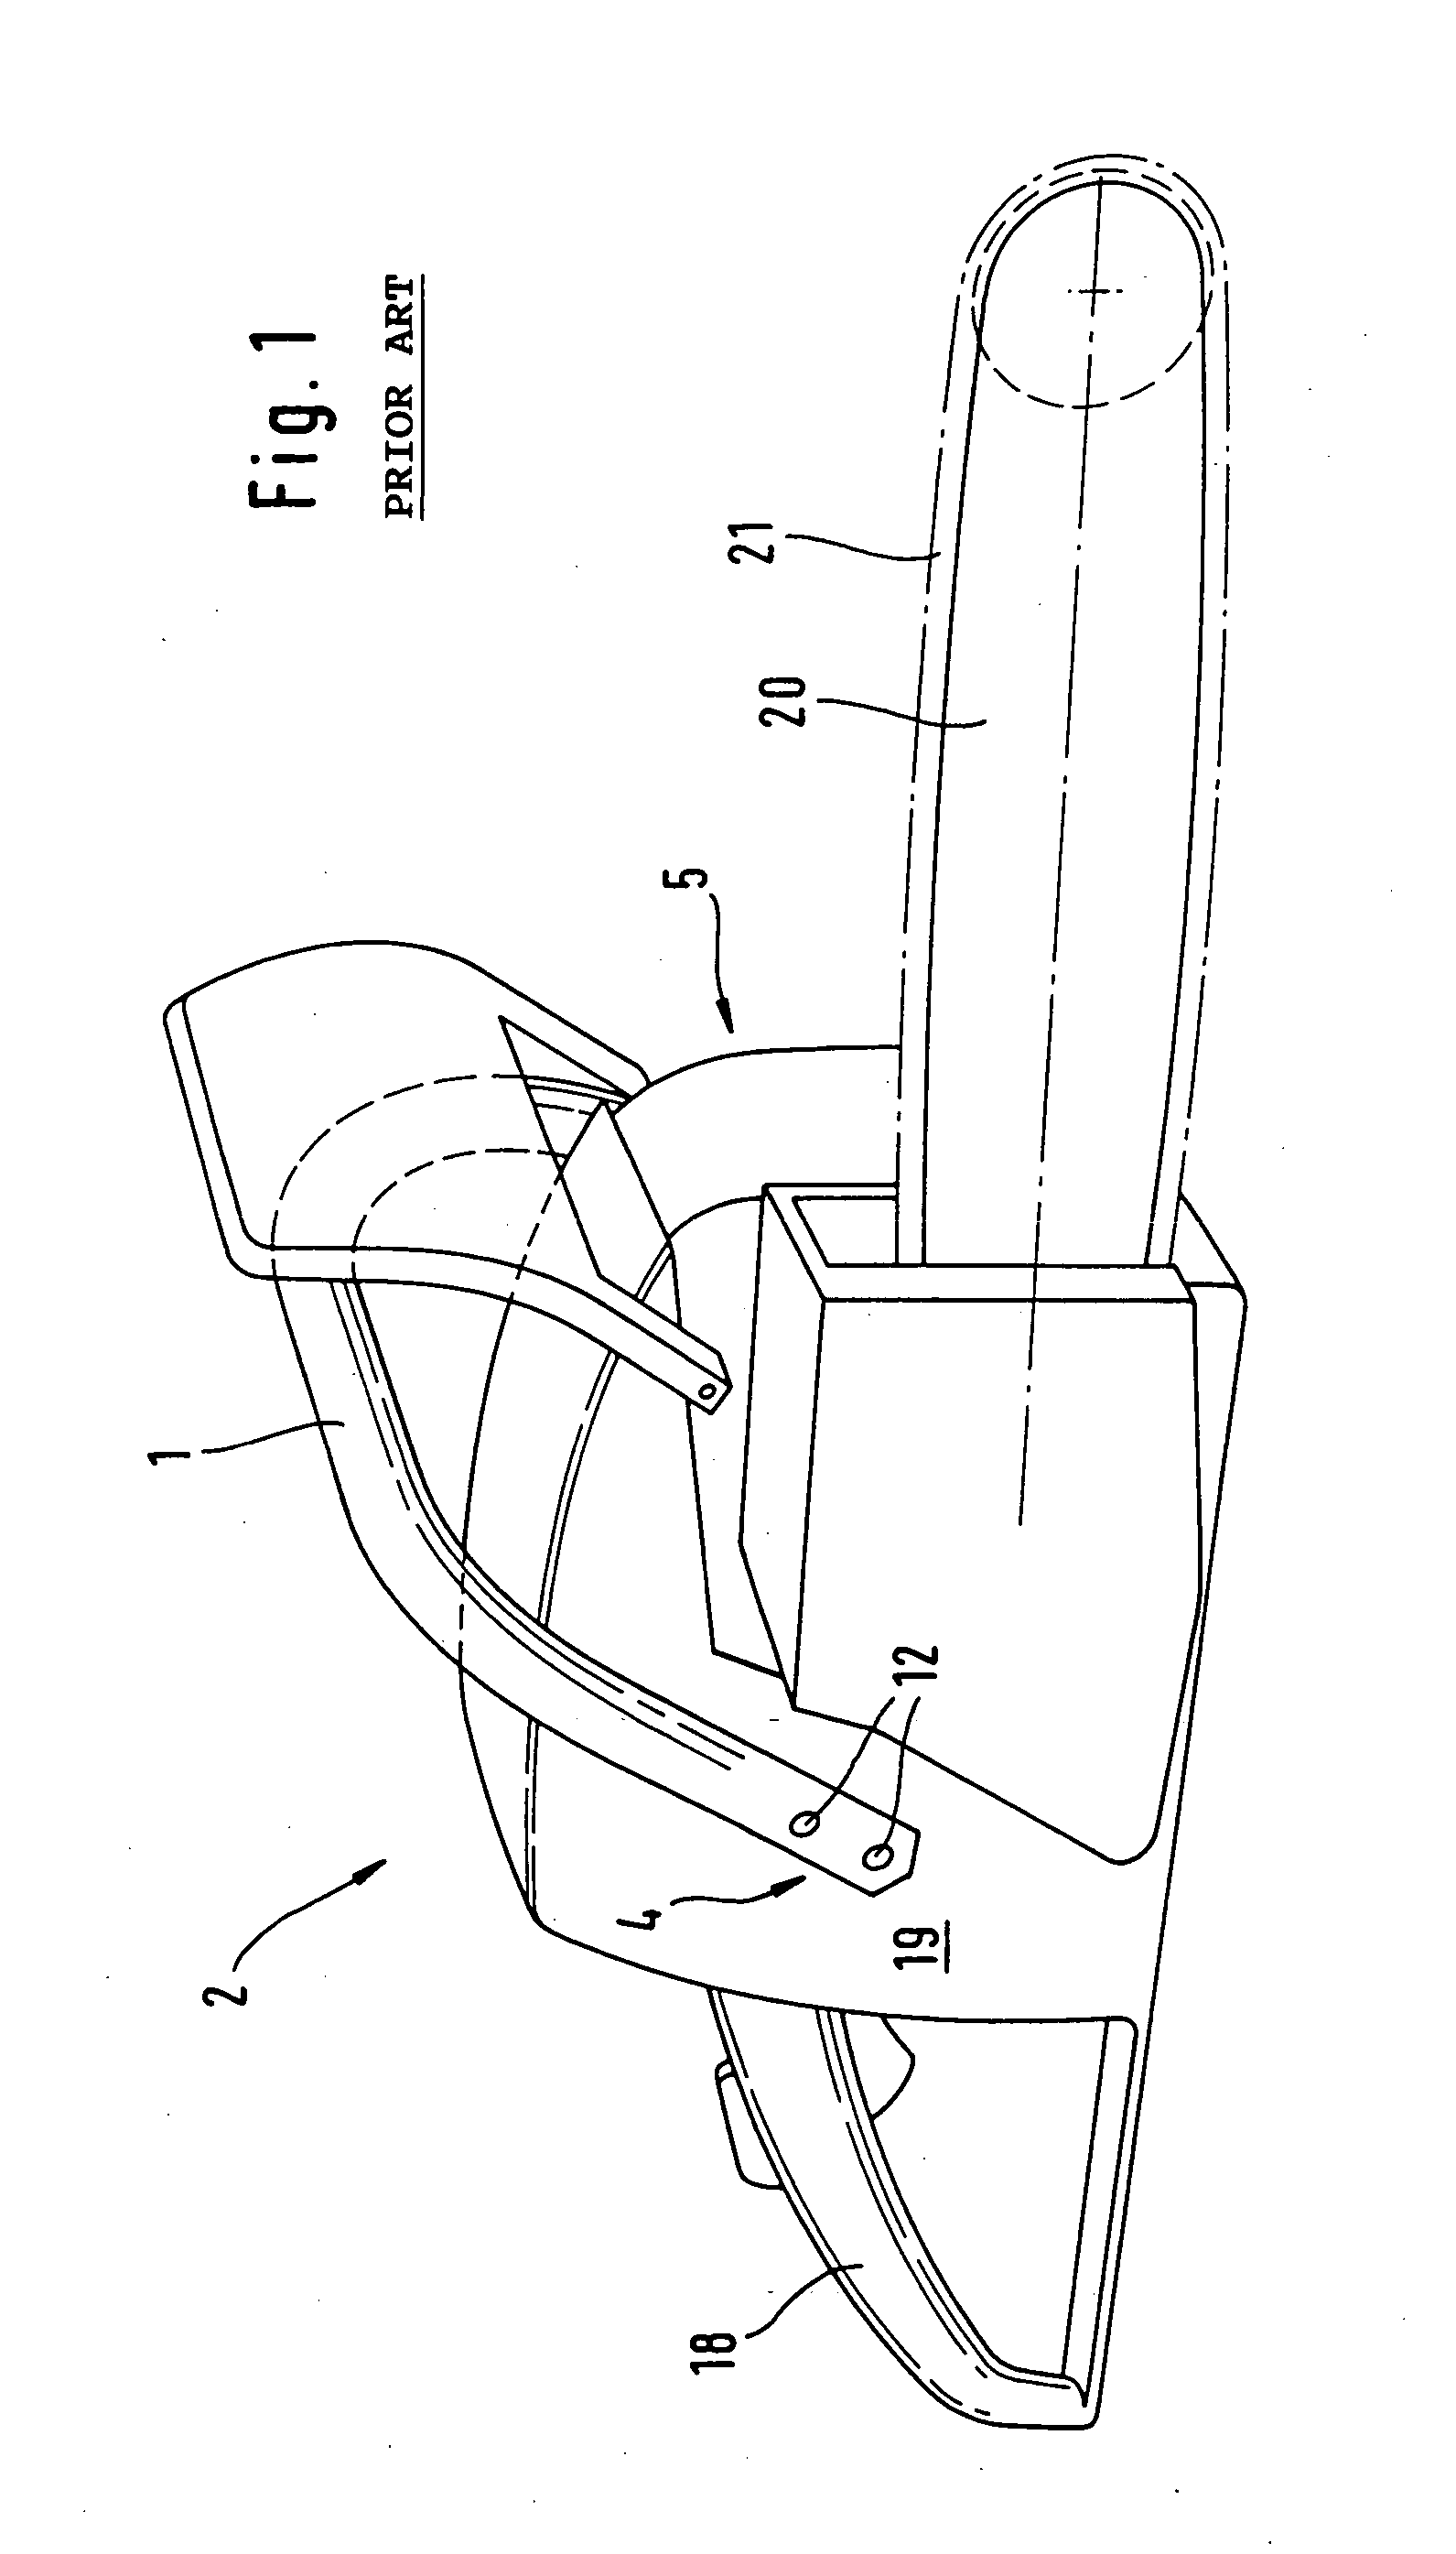 Tubular handle for a manually guided implement